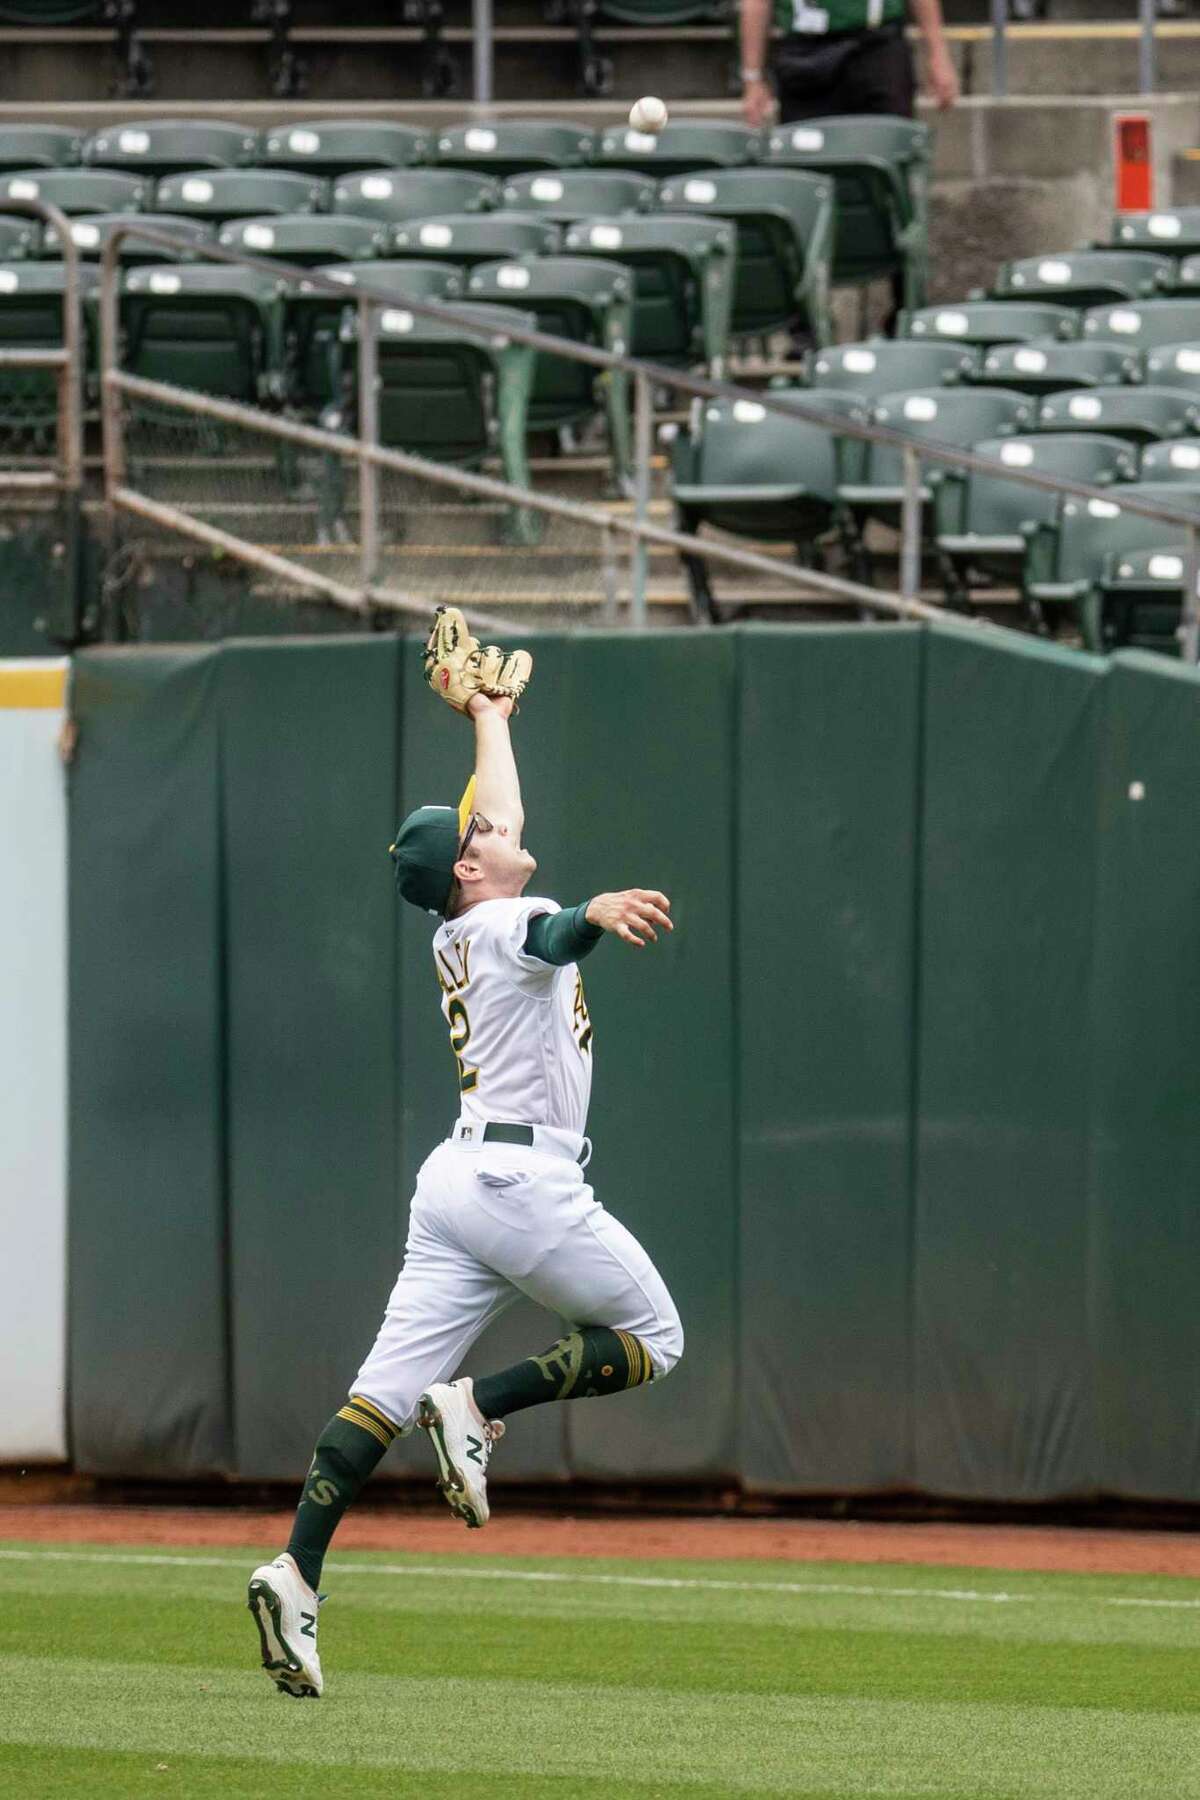 Nick Allen leaps to make a catch against the Toronto Blue Jays last season in Oakland.